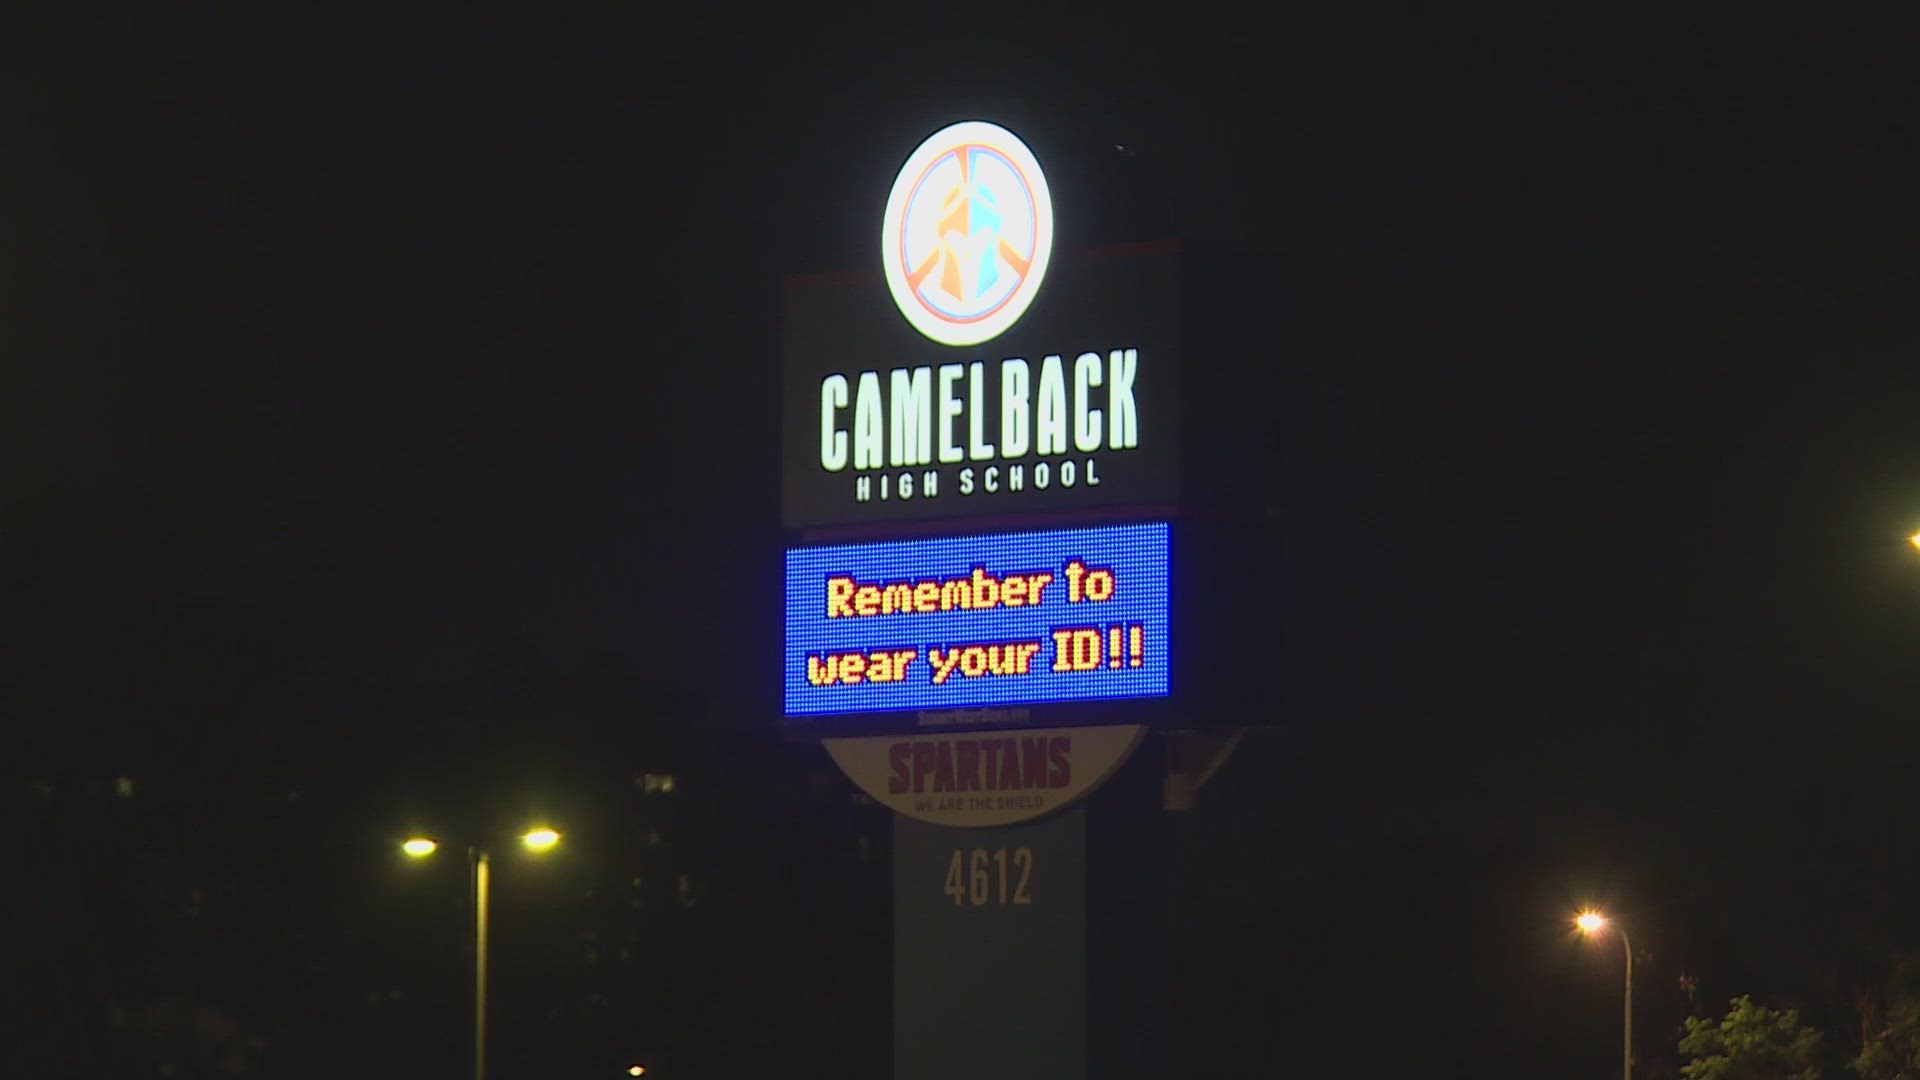 The Camelback High School football team is under investigation for allegations of harassment involving members of the team.